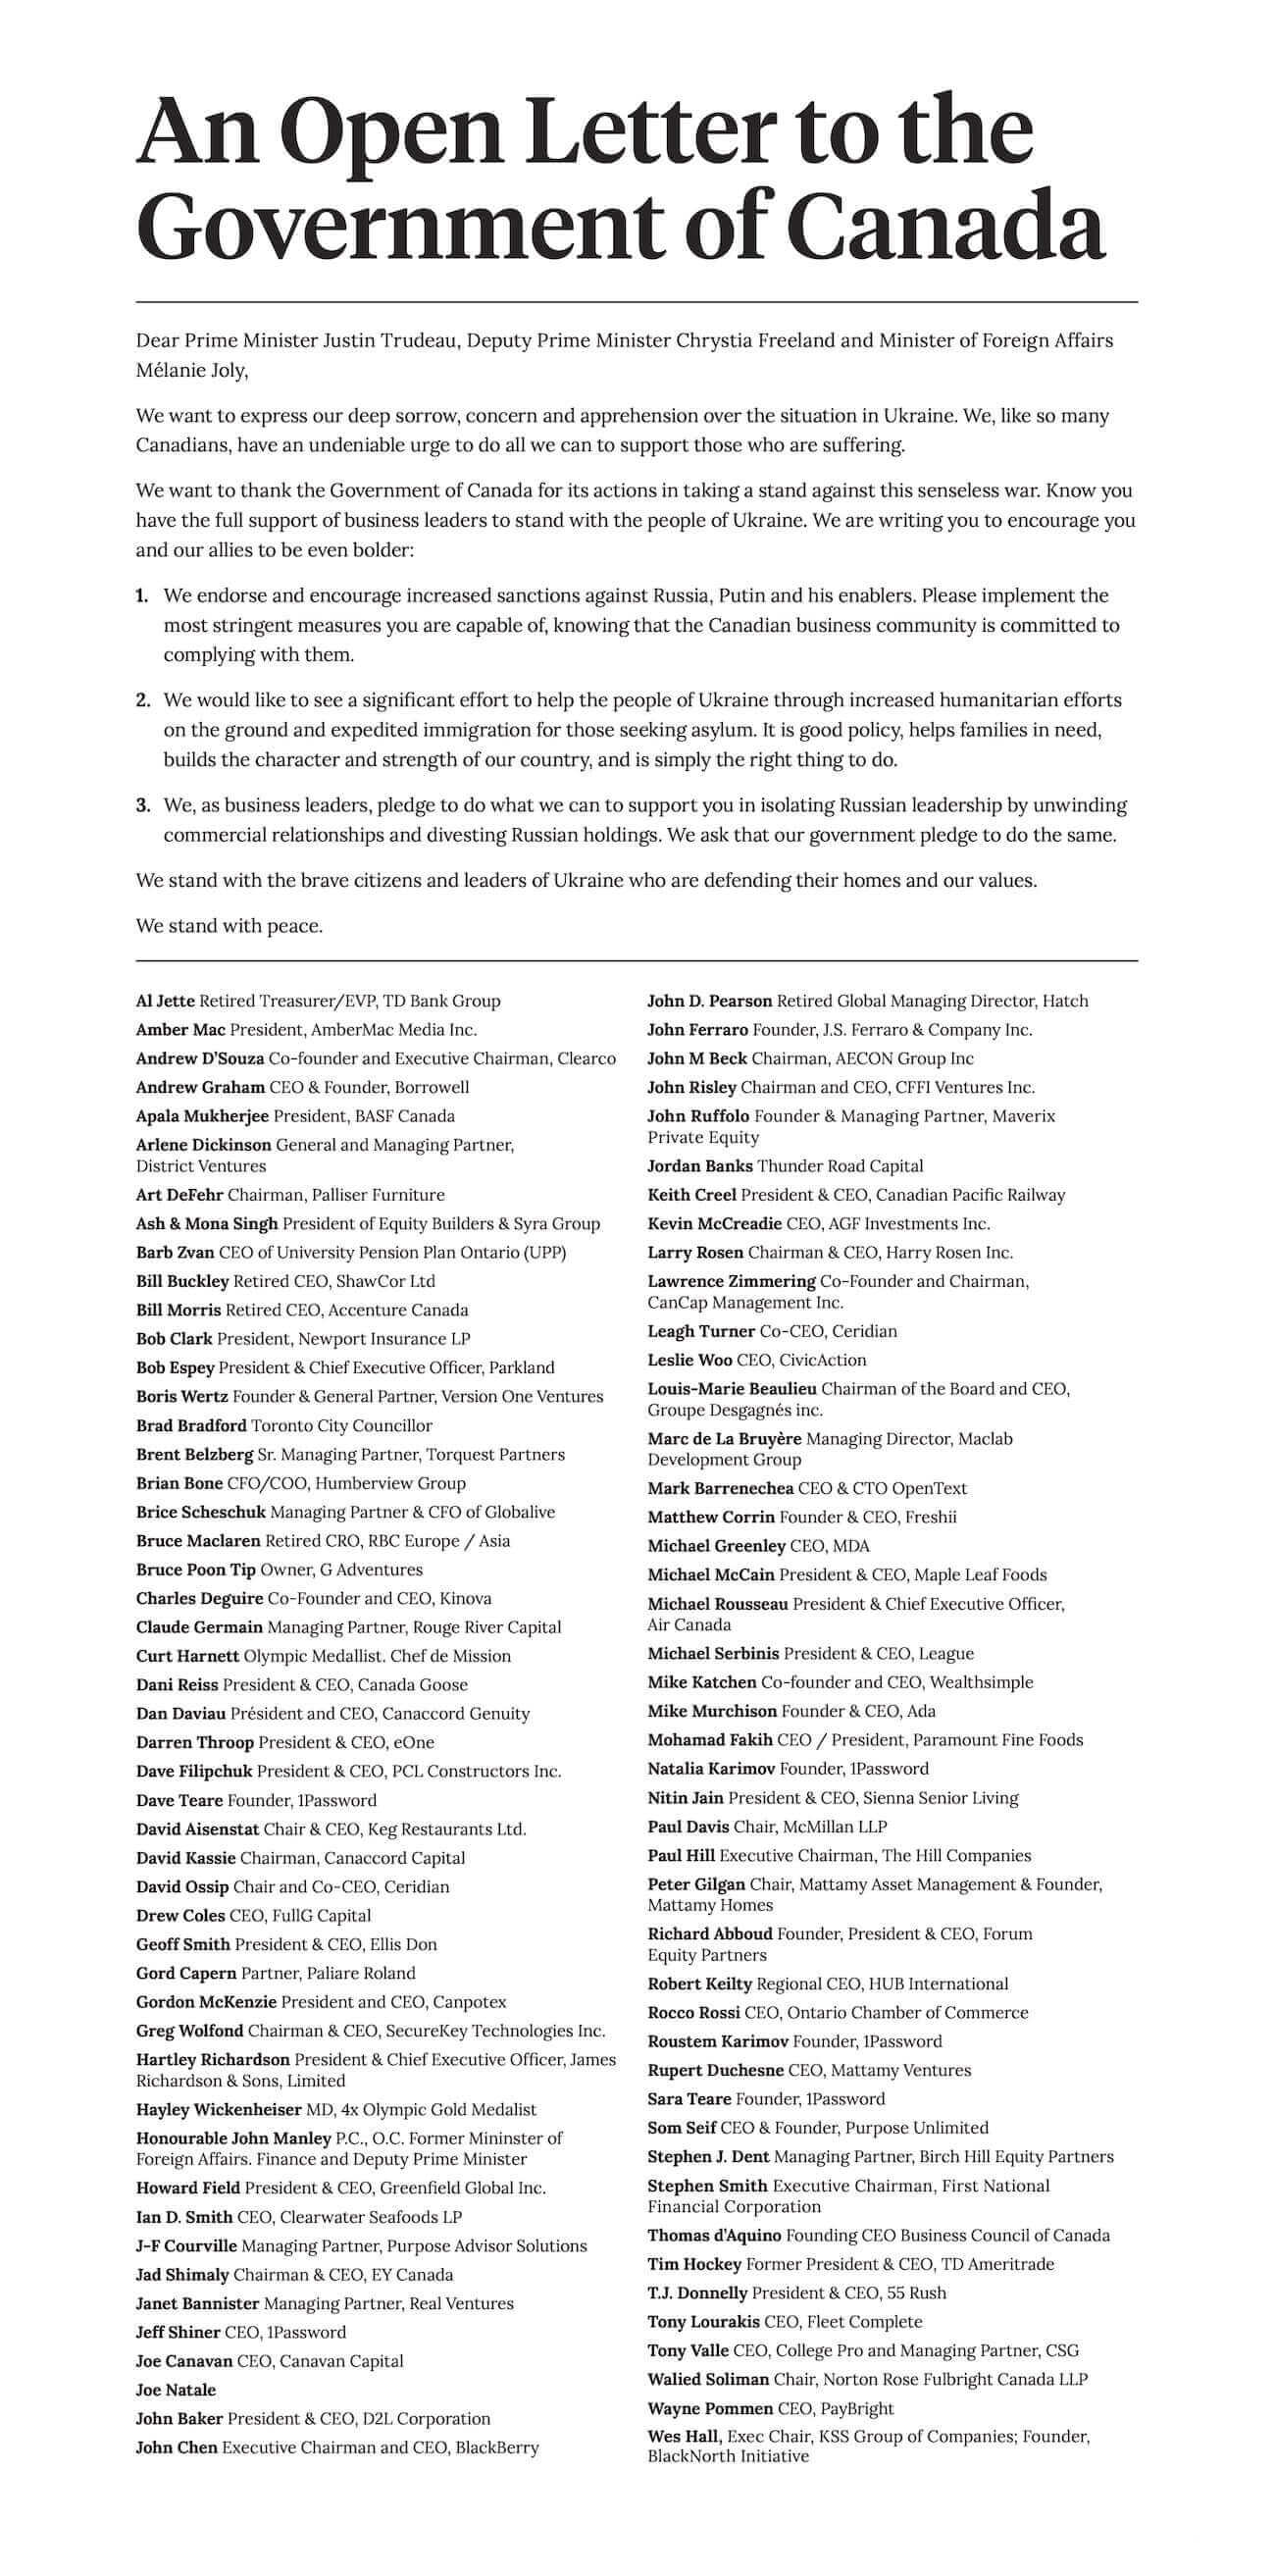 Open letter to the Government of Canada from Canadian business leaders.